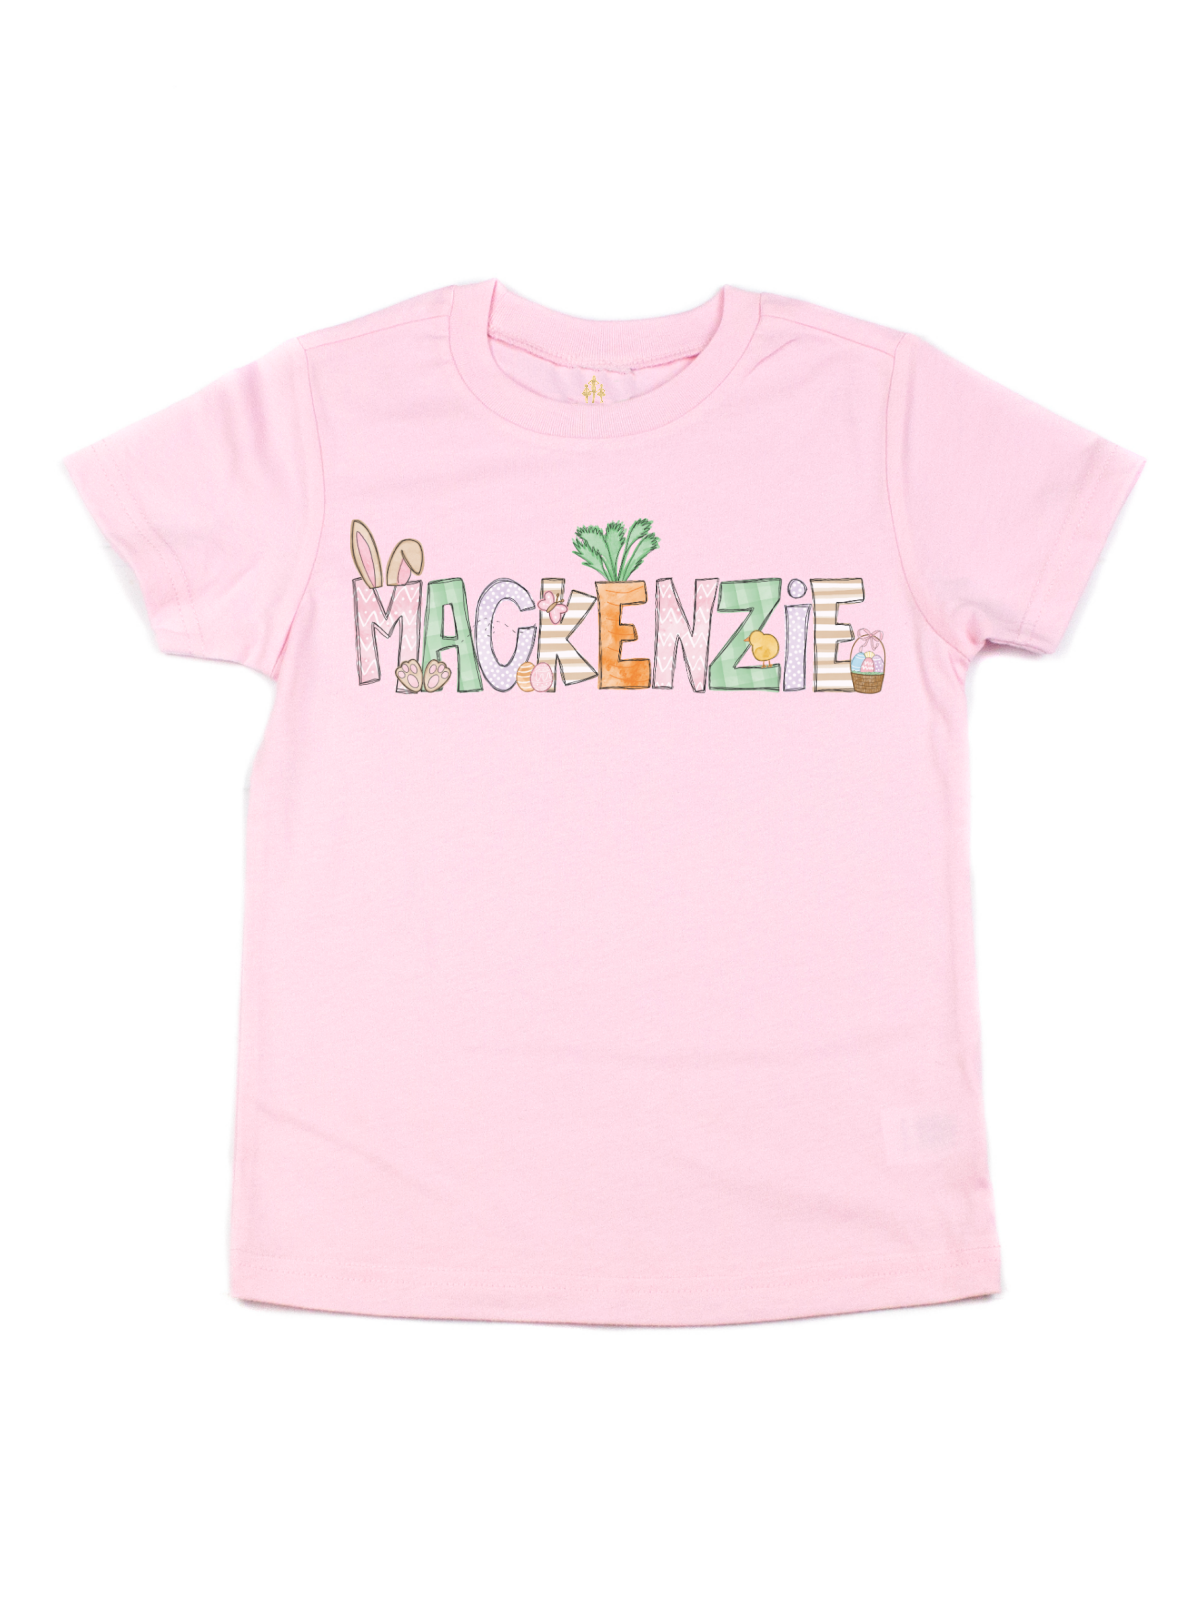 Girls Easter Shirt in Pink